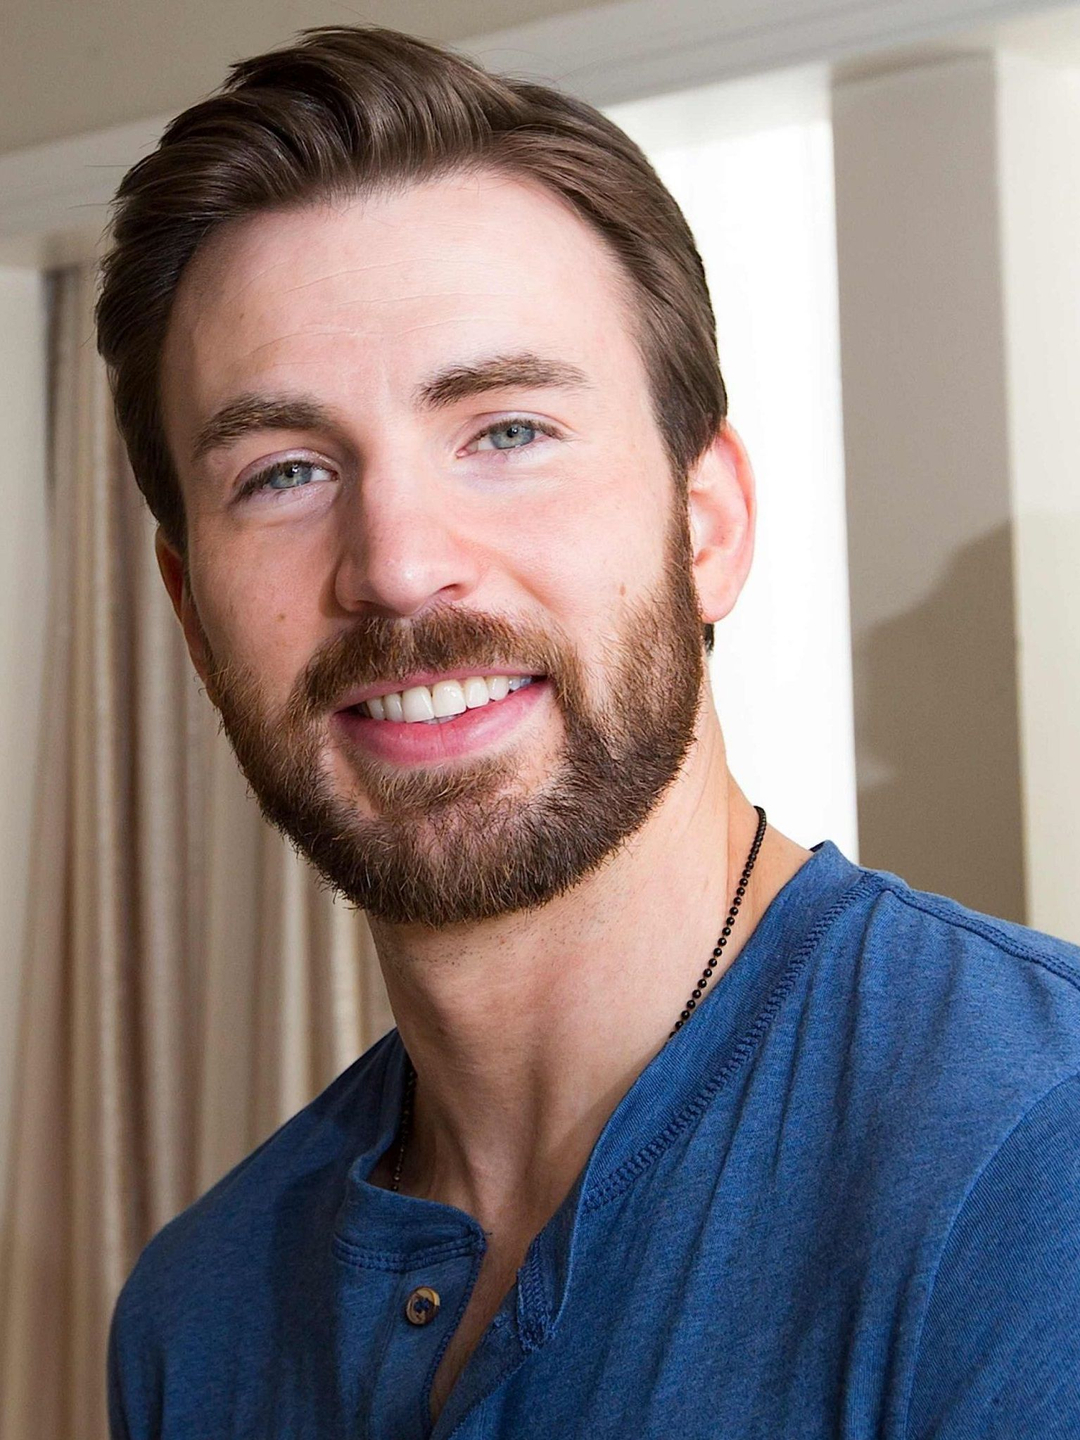 Chris Evans in his youth